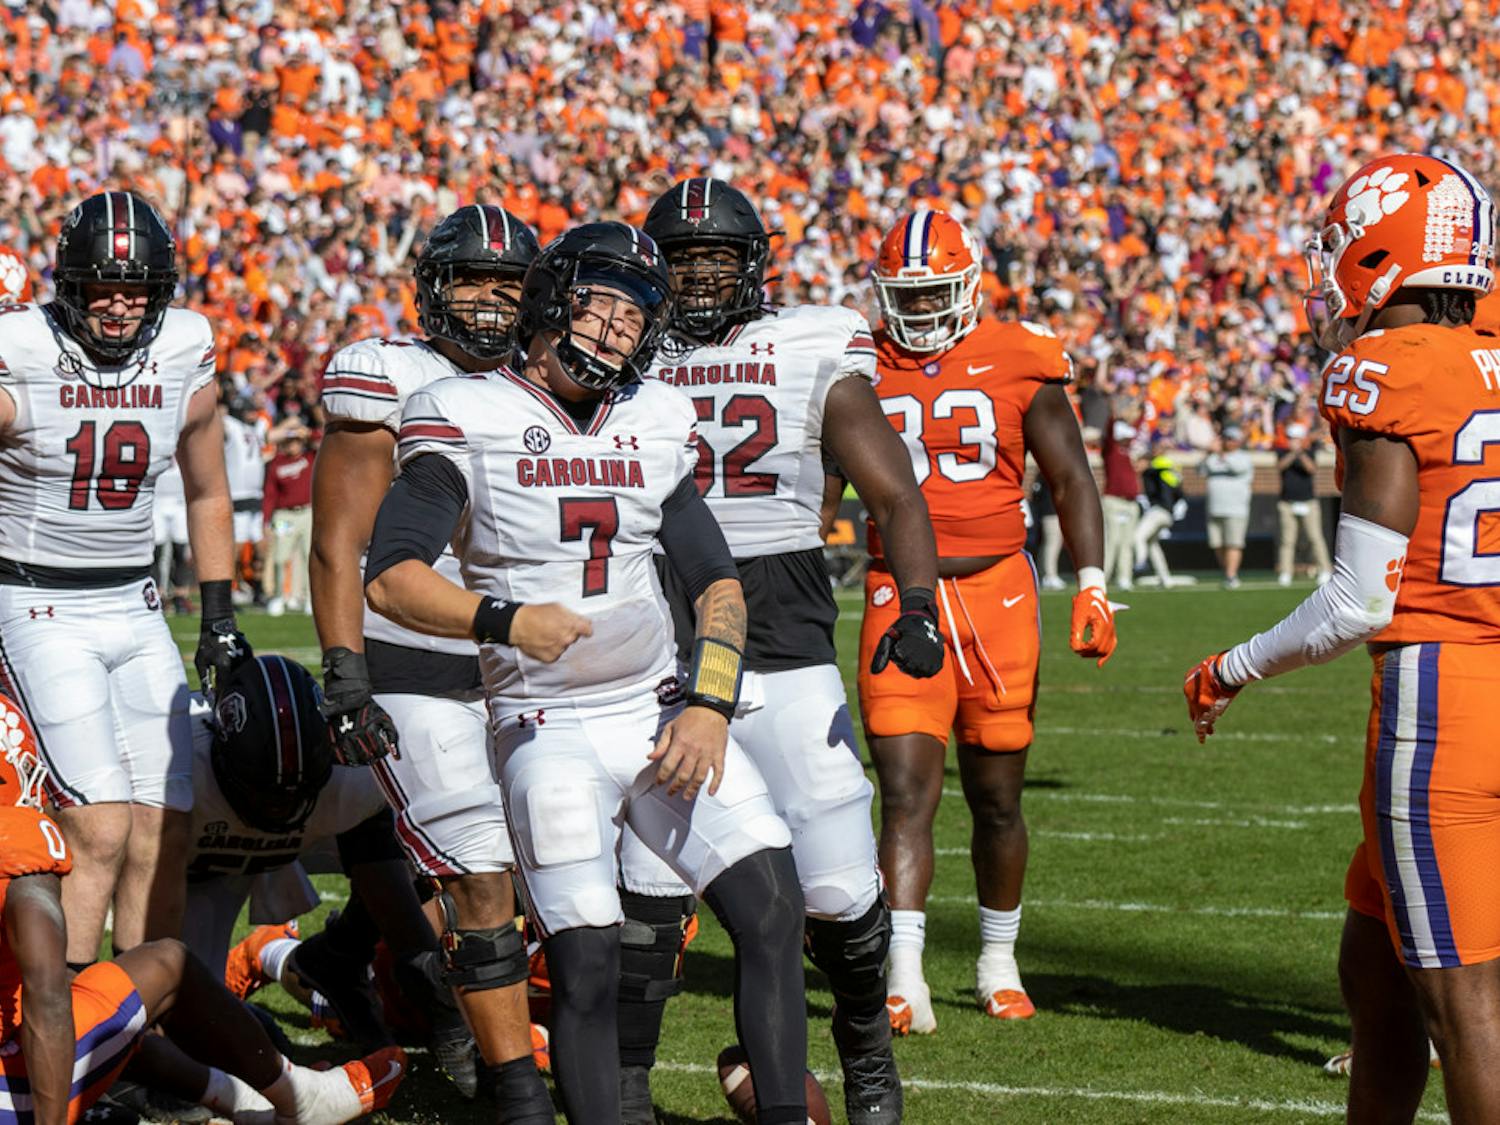 The Gamecocks defeated rival Clemson 31-30 in the Palmetto Bowl after a competitive game. The Palmetto Bowl marks the end of regular season for both teams and leads to the playoffs. The marked the first time the Gamecocks have beaten the Tigers since November 2013 and snapped Clemson's 40-game home winning streak.&nbsp;